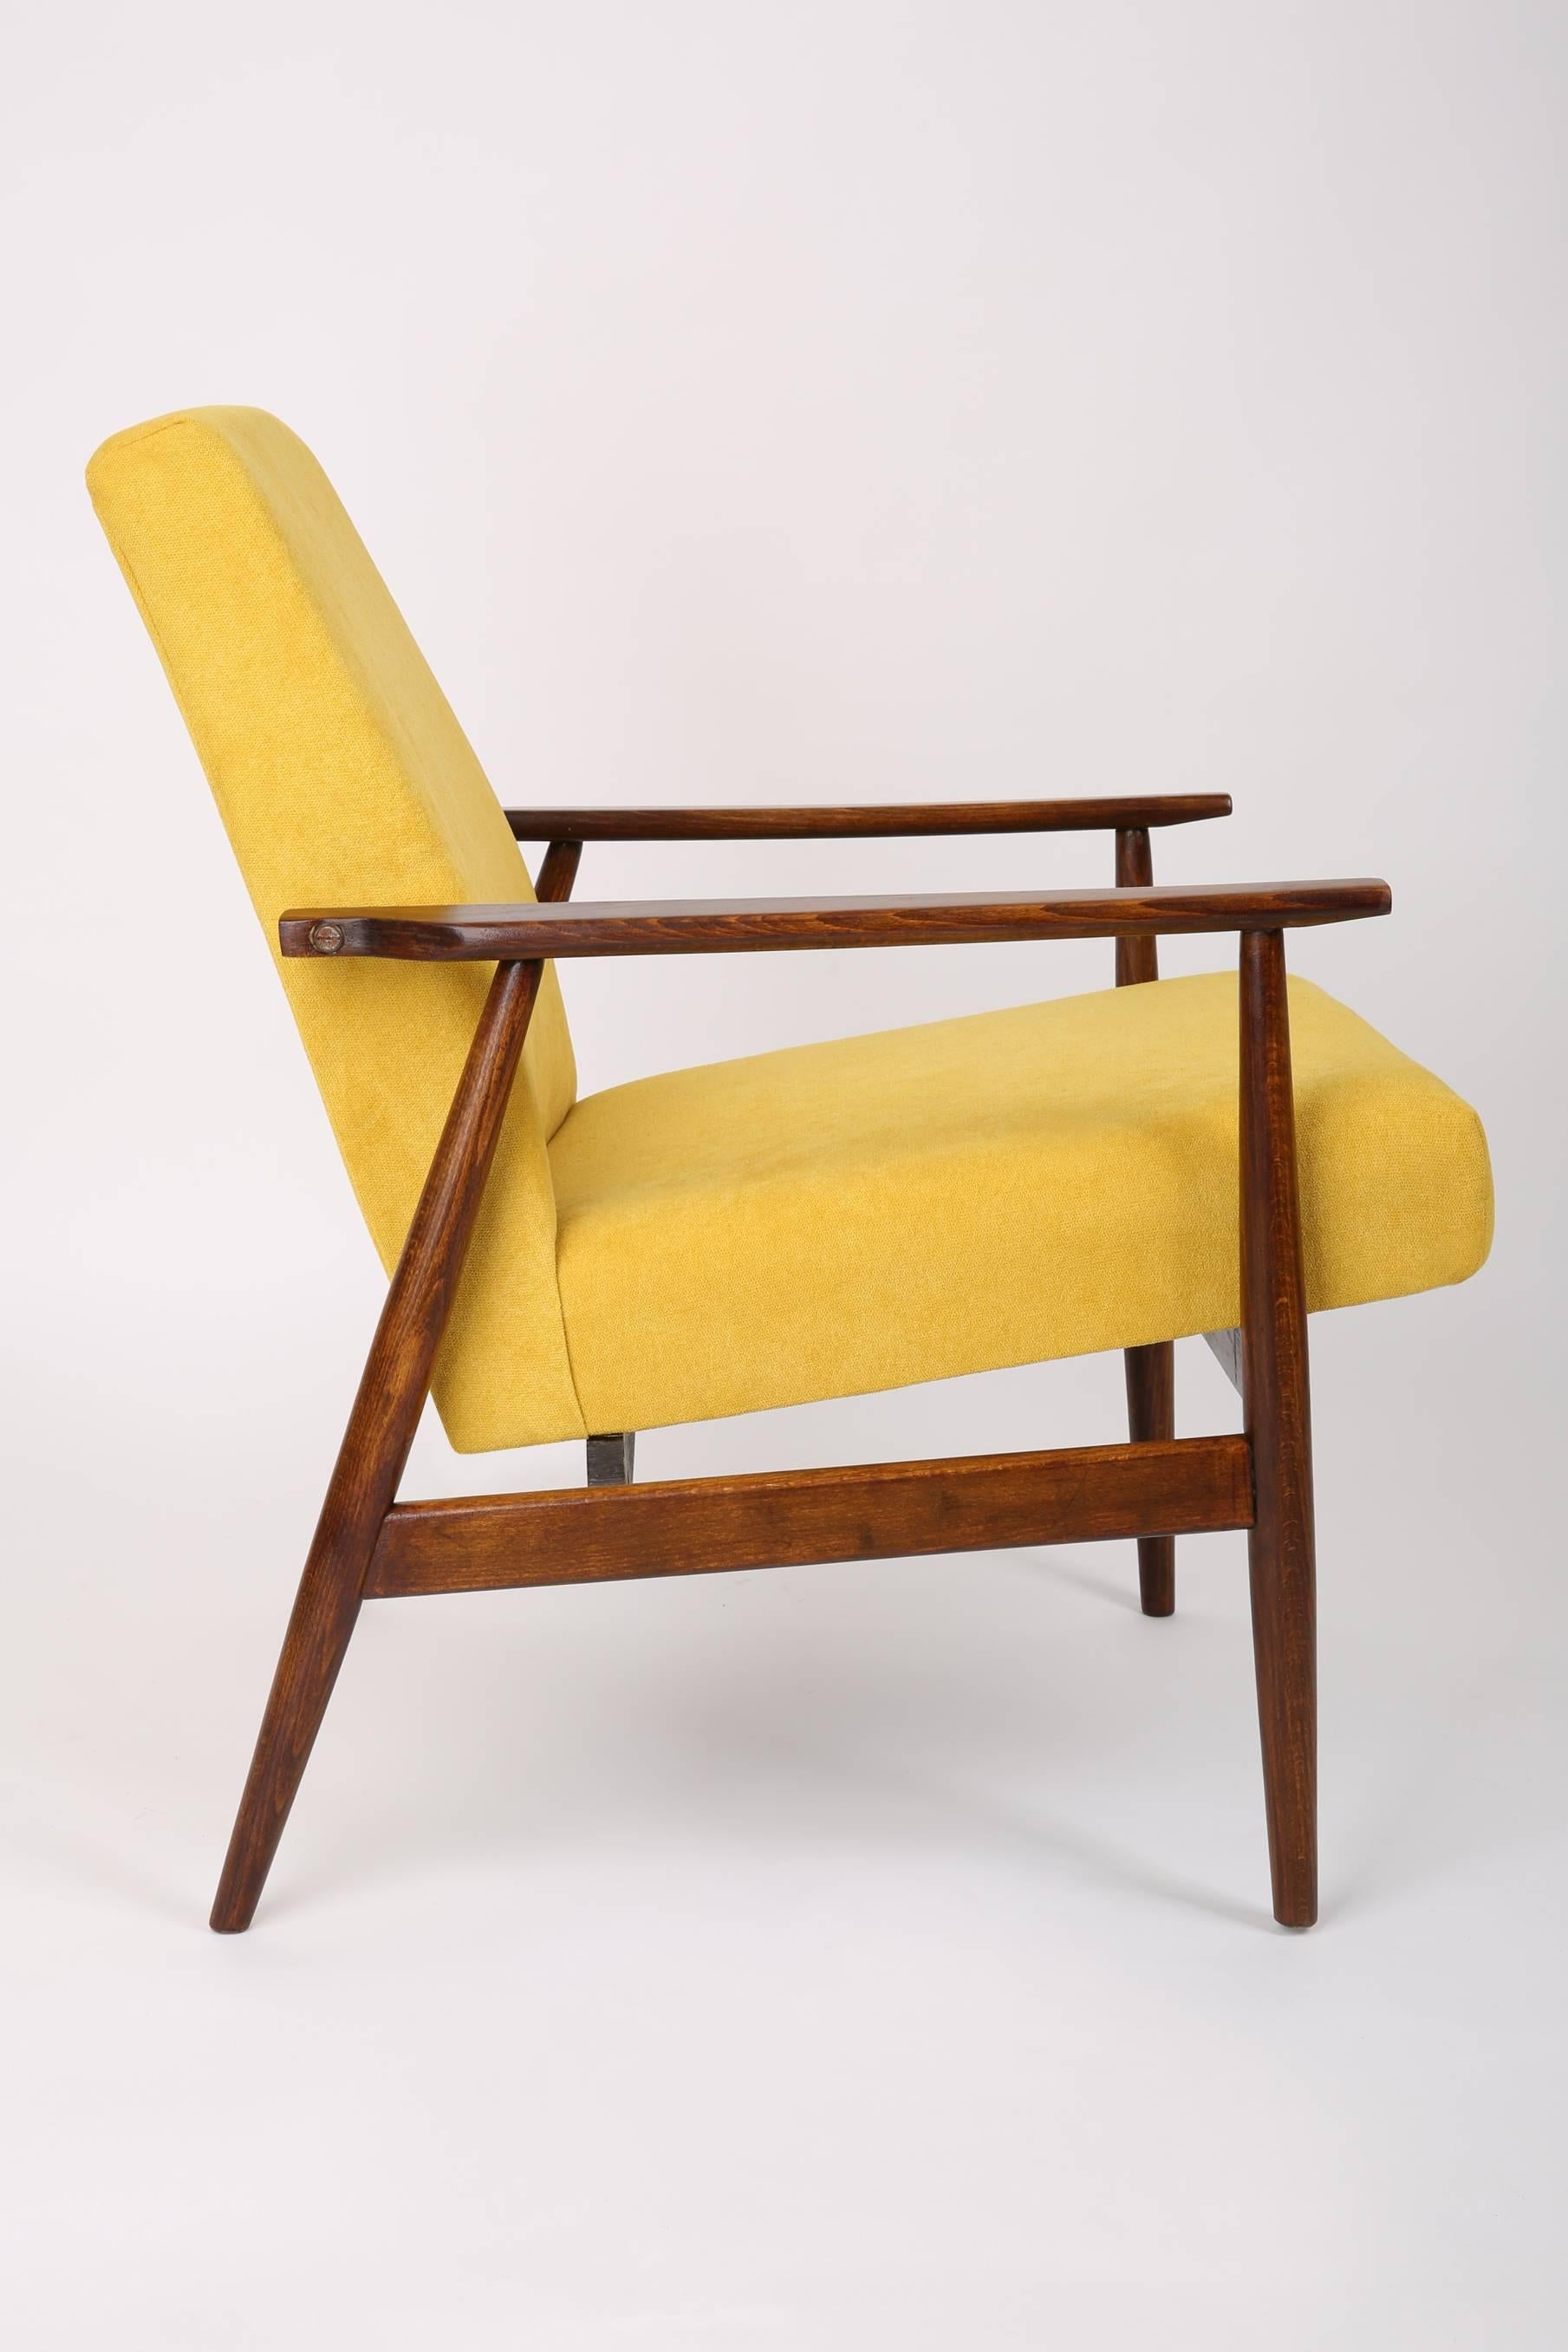 Hand-Crafted Pair of Mid Century Yellow Dante Armchairs, H. Lis, Europe, 1960s. For Sale